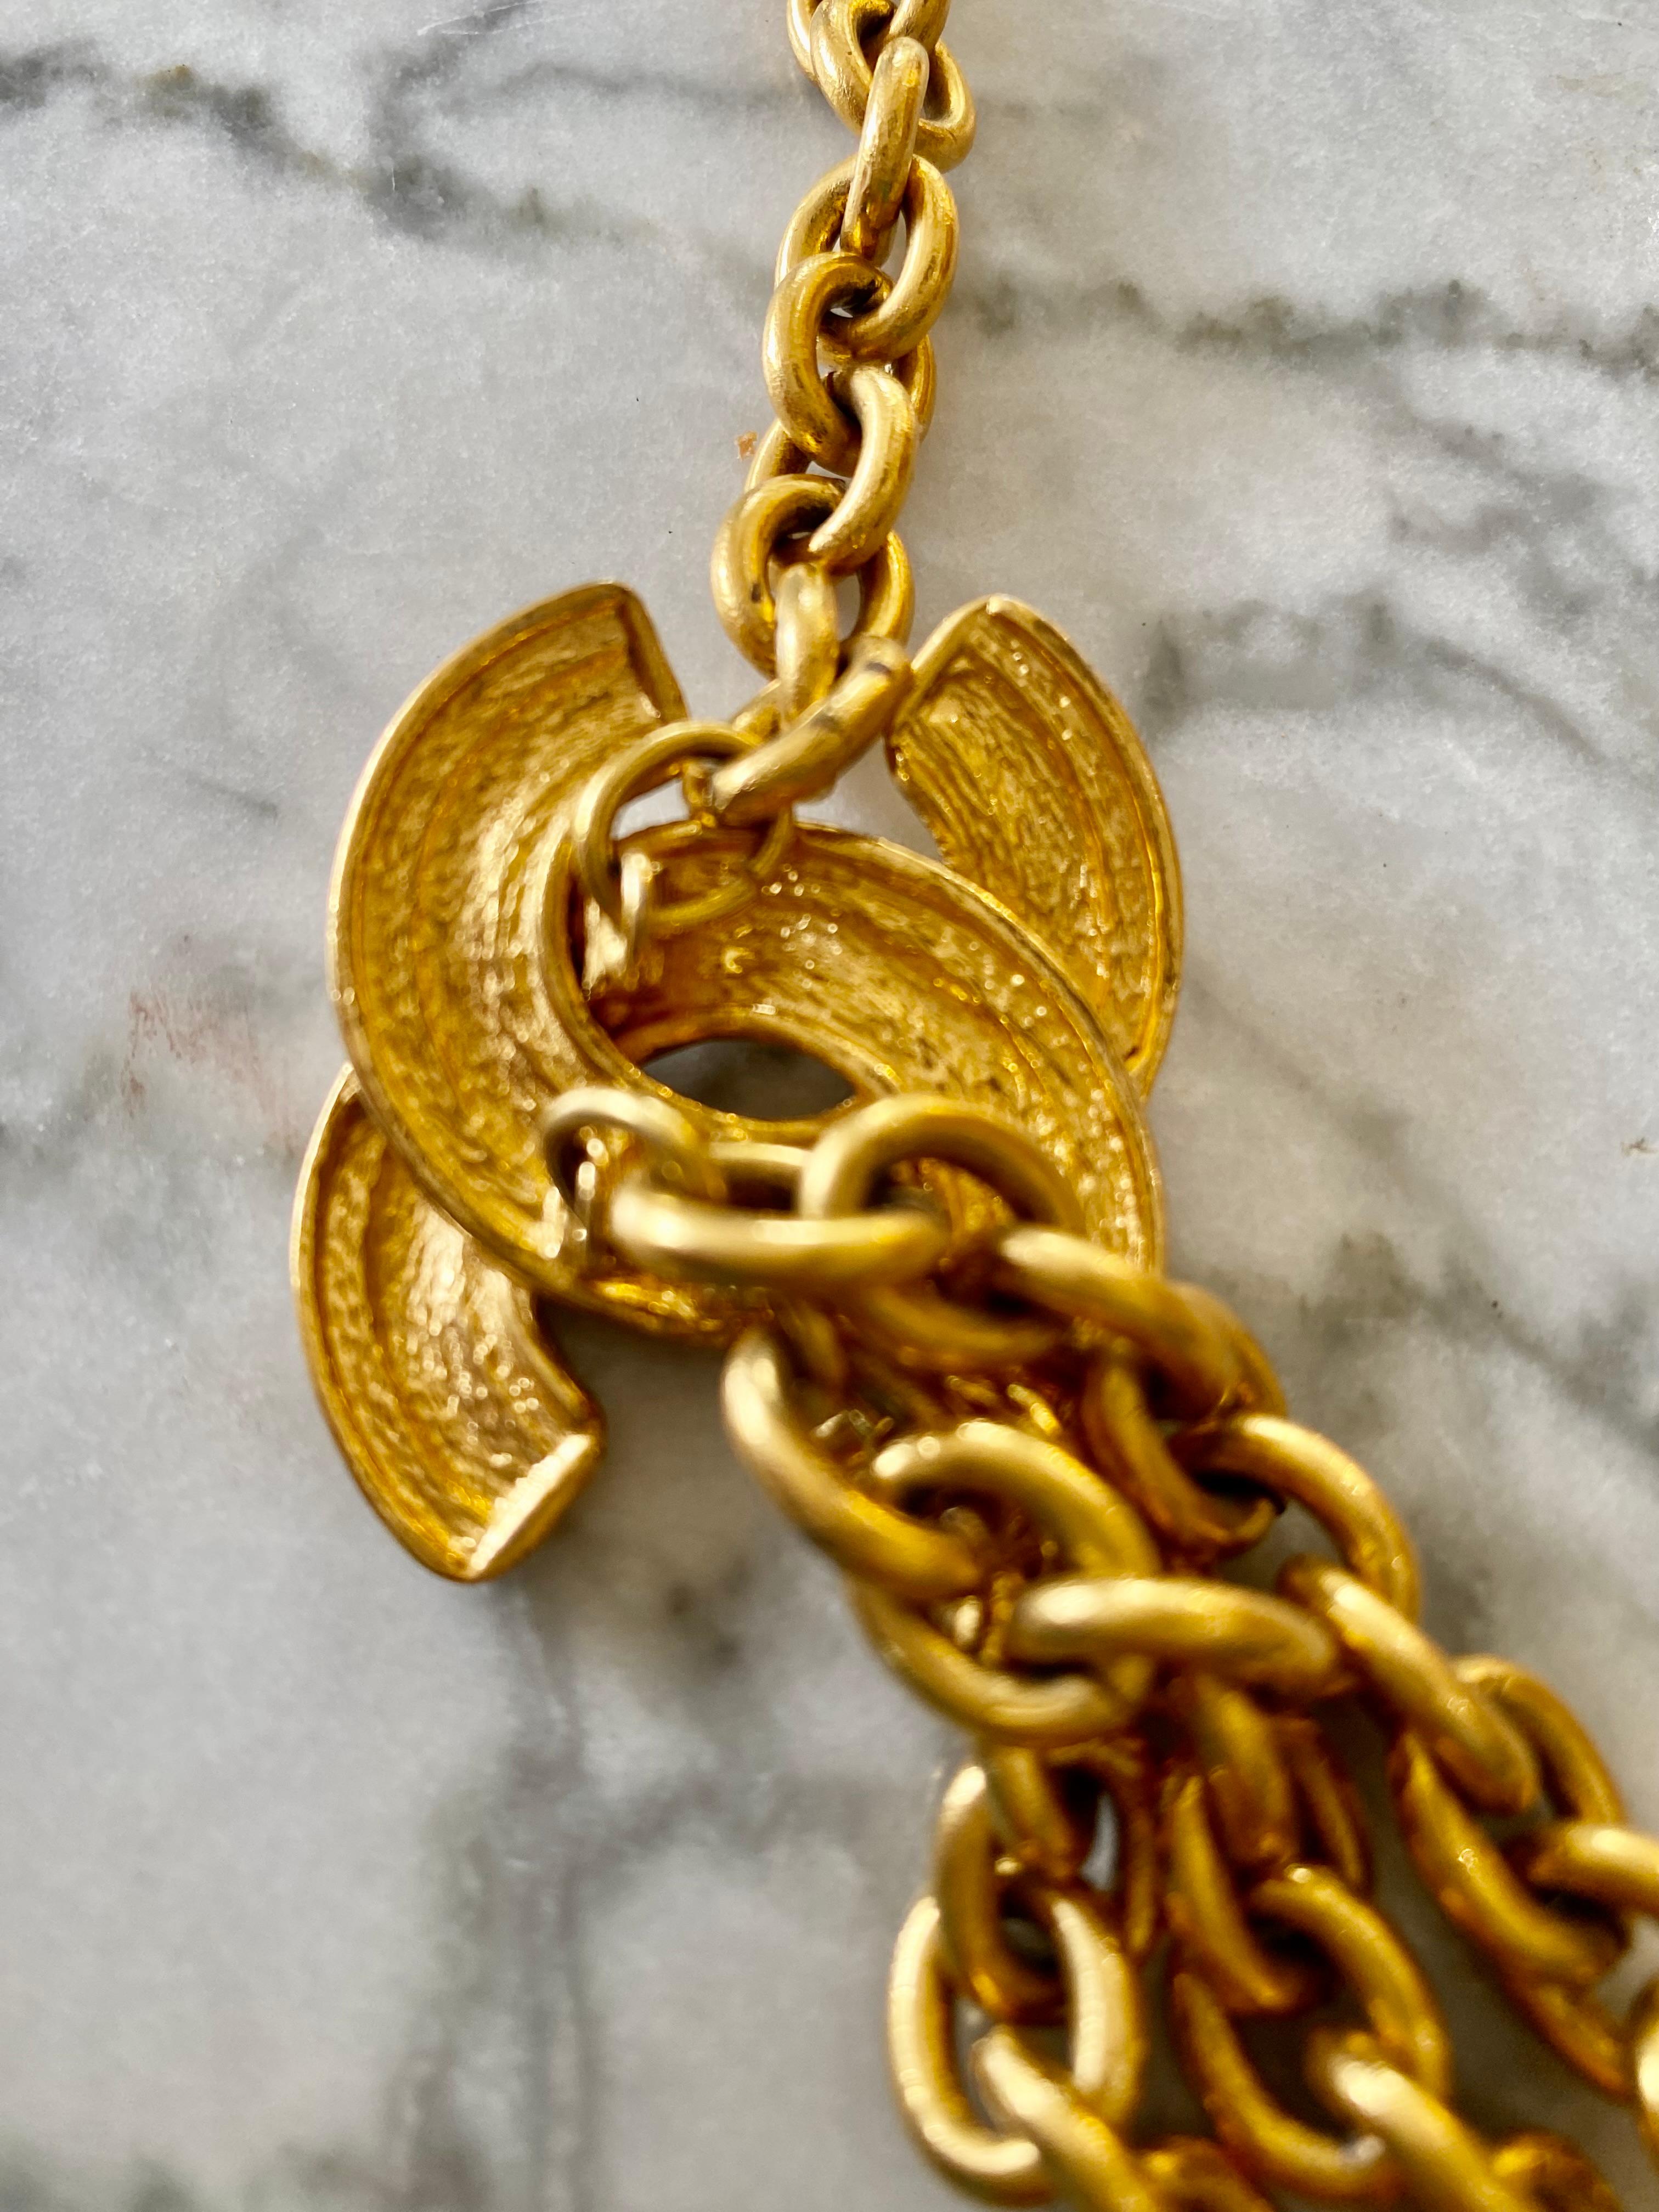  Chanel Gilt gold Chain with a 2 large medaillon CC Vintage ,France 1990s

This Chanel neklace  is from 1990s. It is in really good condition. The belt is made of metal gilded  It's hallmarked Chanel on the 2 hook, and on the metal plate. The CC